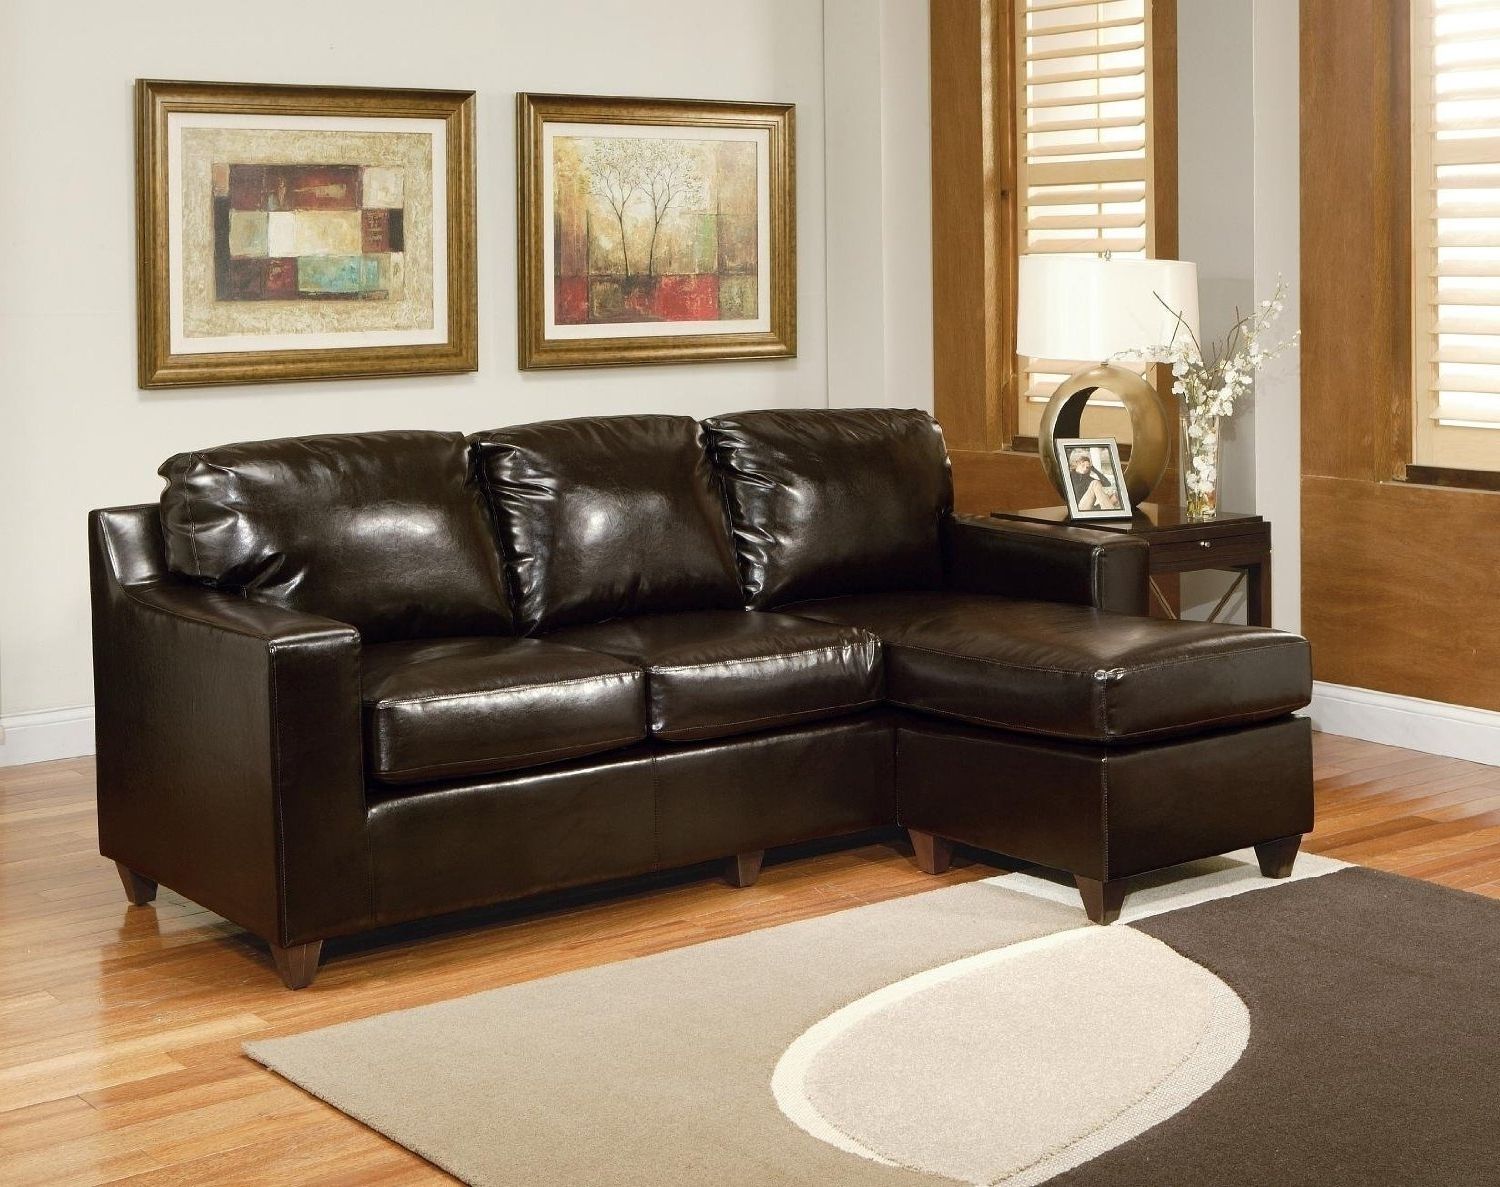 Newest Small Spaces Sectional Sofas With Small Spaces Sectional Sofa Modern Family Home In Israel With (View 18 of 20)